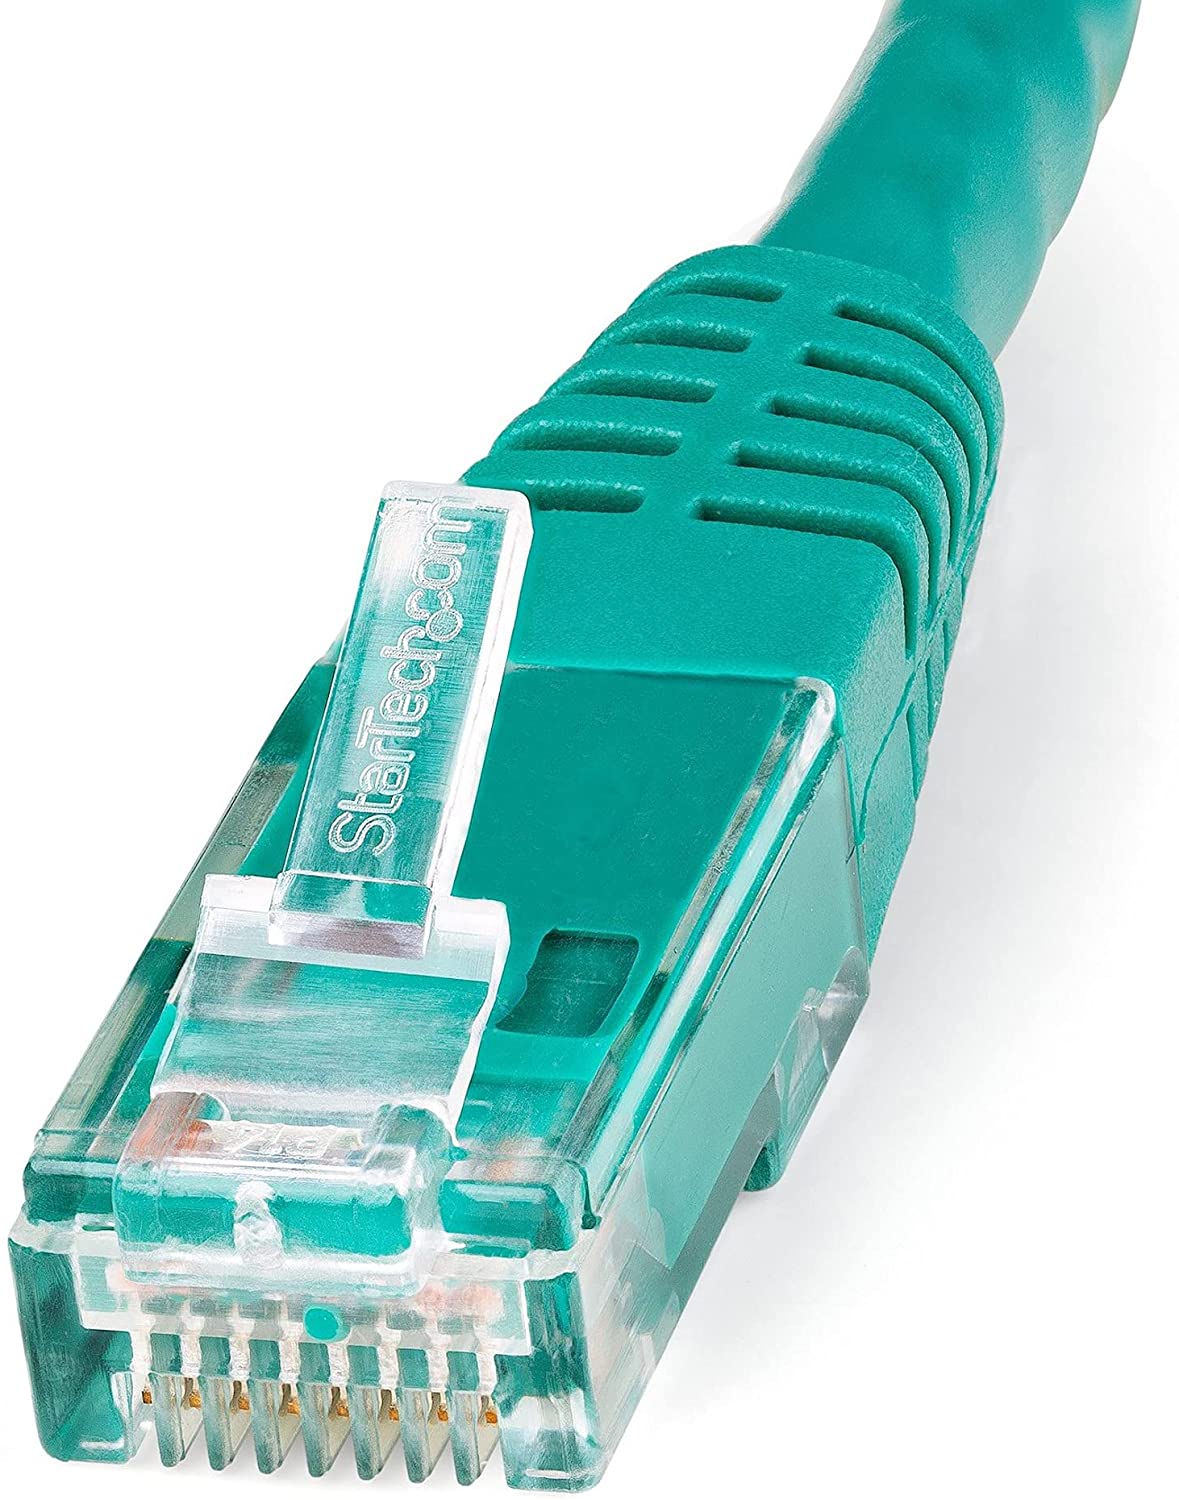 StarTech.com 50ft CAT6 Ethernet Cable - Green CAT 6 Gigabit Ethernet Wire -650MHz 100W PoE++ RJ45 UTP Molded Category 6 Network/Patch Cord w/Strain Relief/Fluke Tested UL/TIA Certified (C6PATCH50GN) Green 50 ft / 15 m 1 Pack